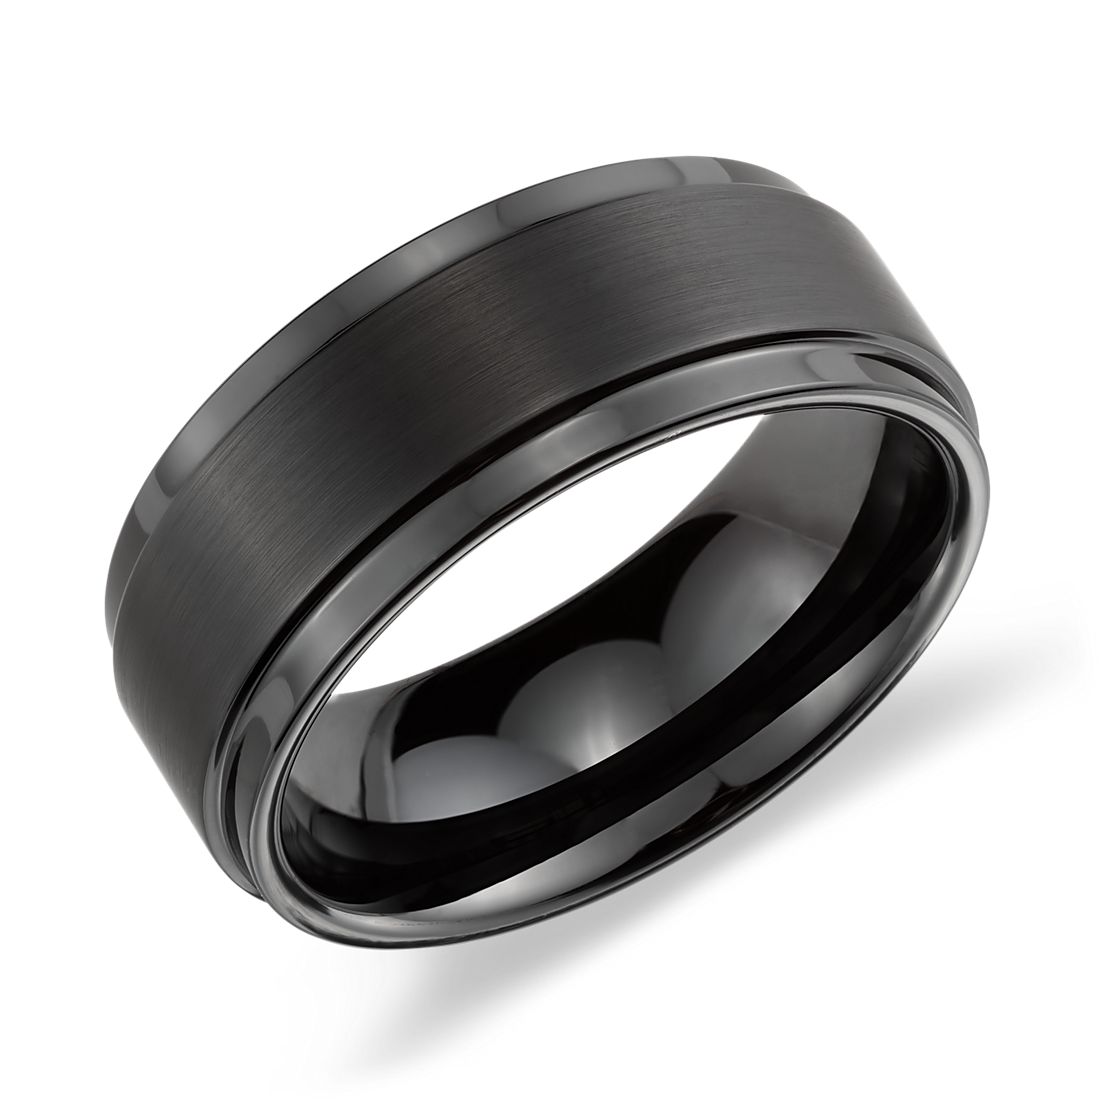 Brushed and Polished Comfort Fit Wedding Ring in Black